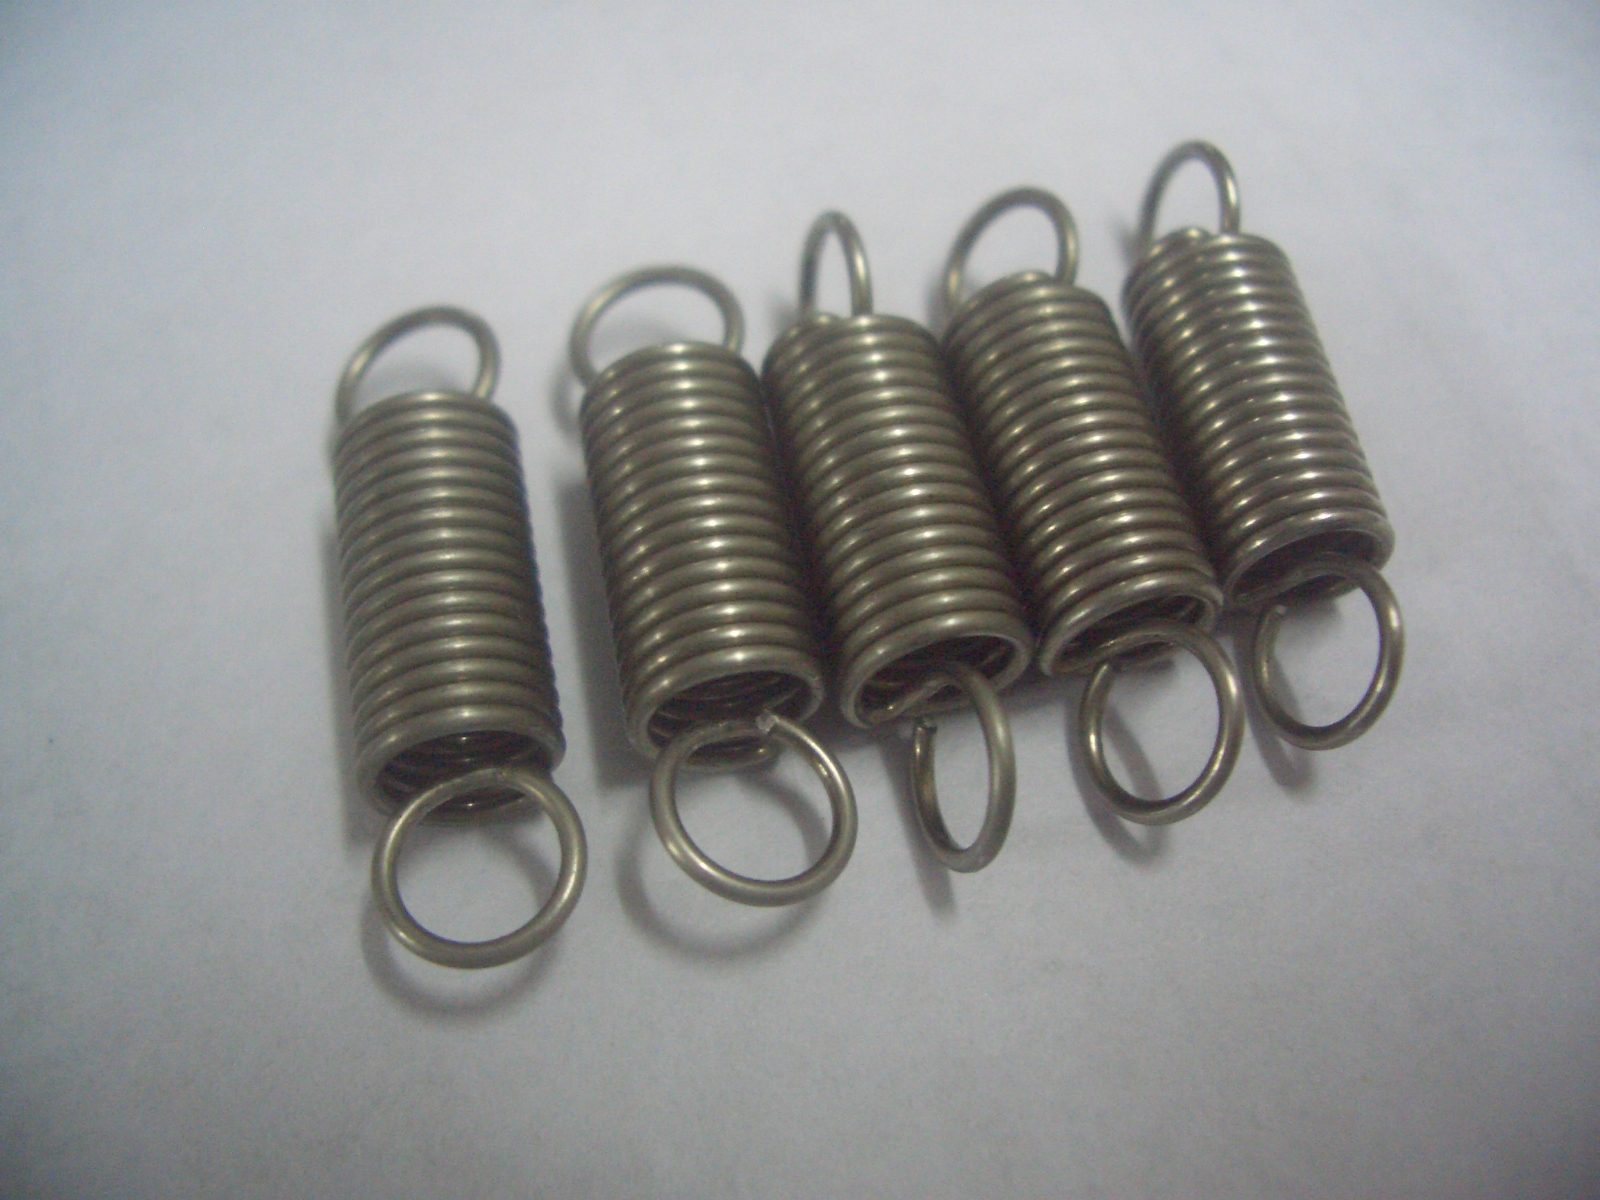 Extension Springs with Different Shapes